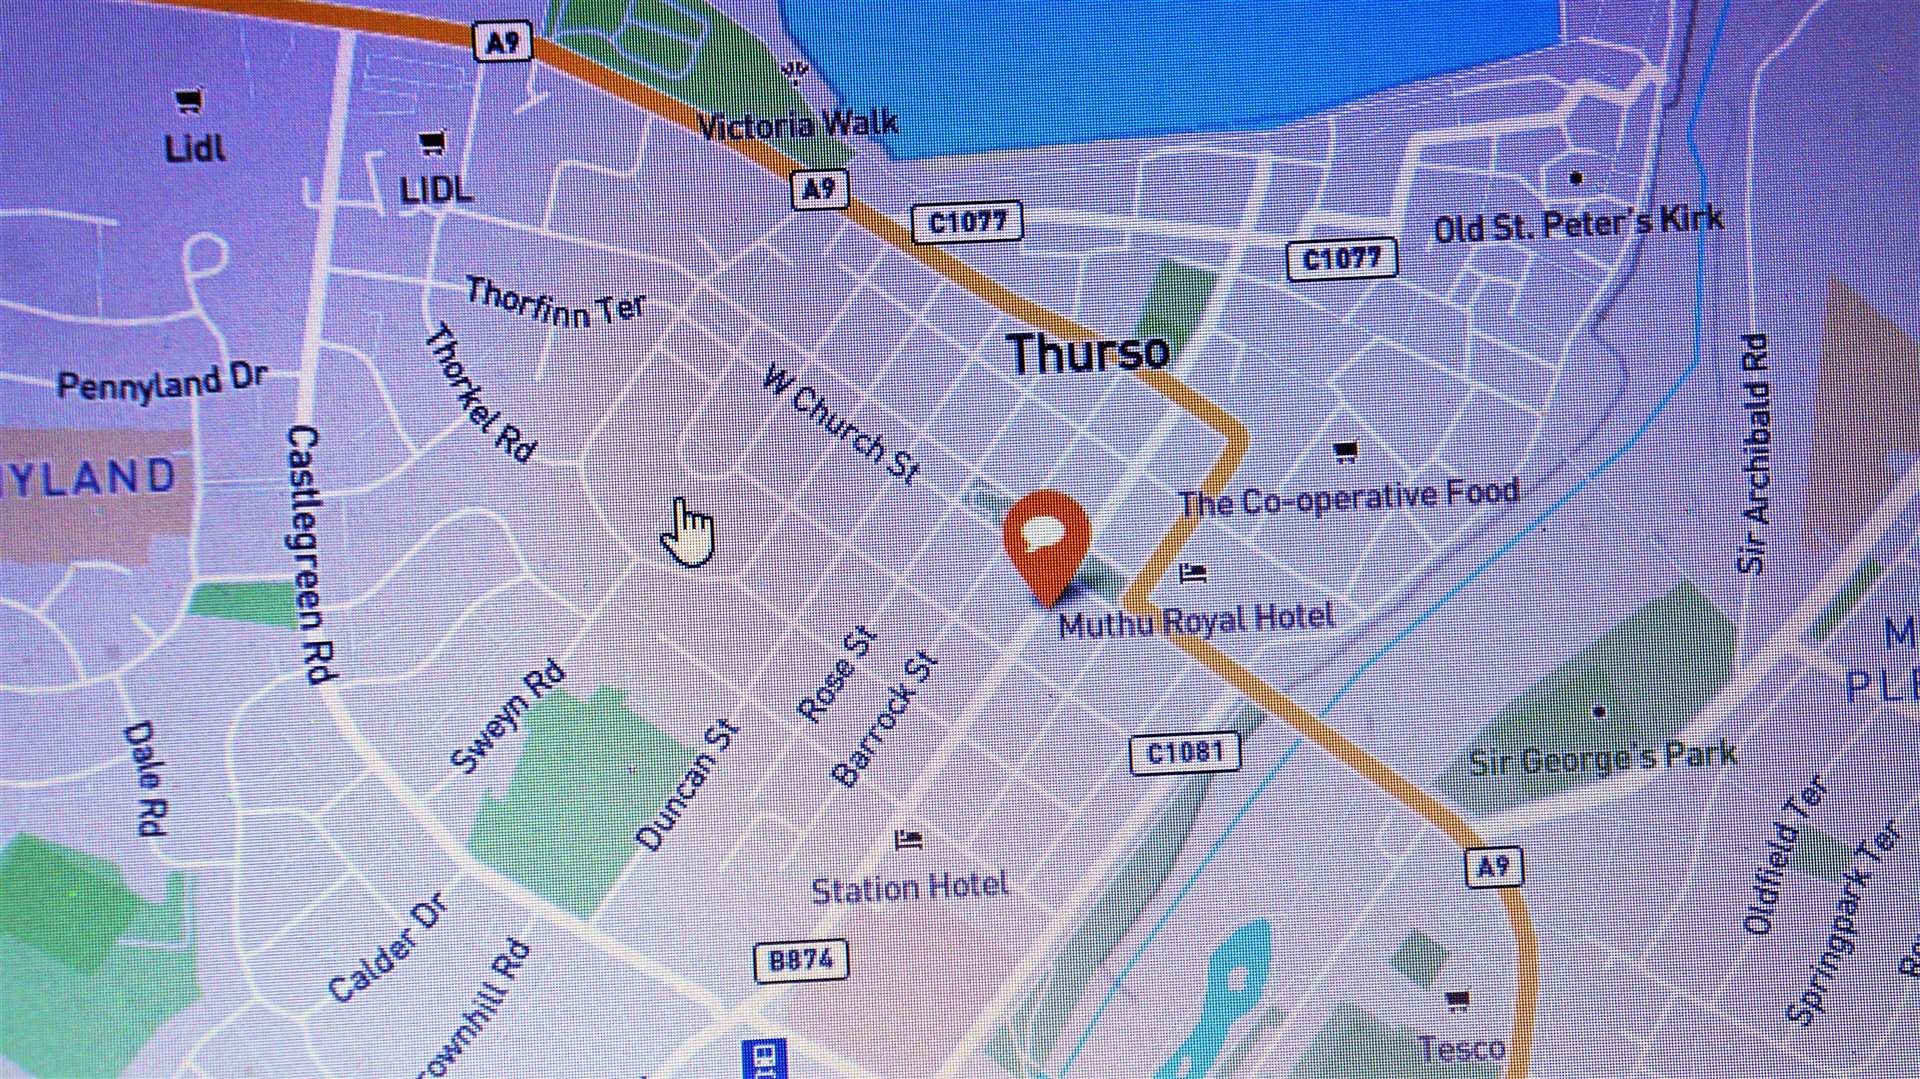 Interactive map of Thurso produced on the website.